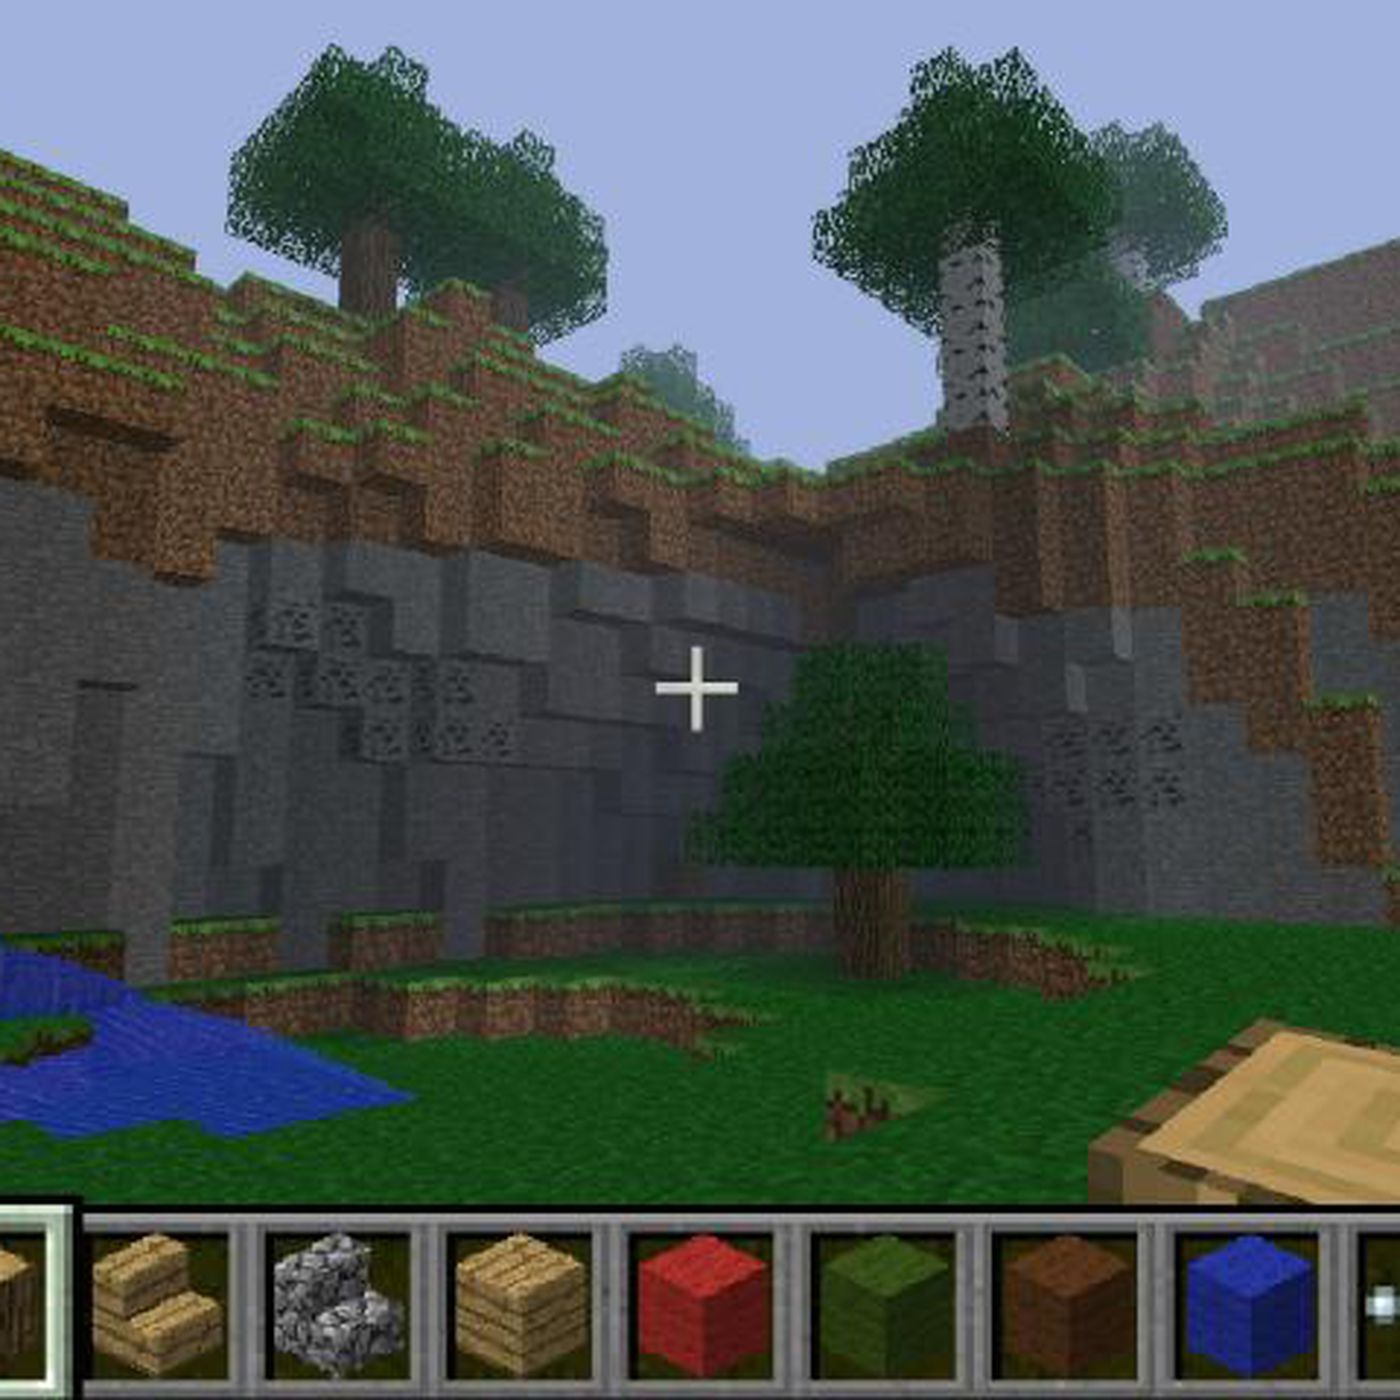 Minecraft Pocket Edition For Android Updated With Survival Mode